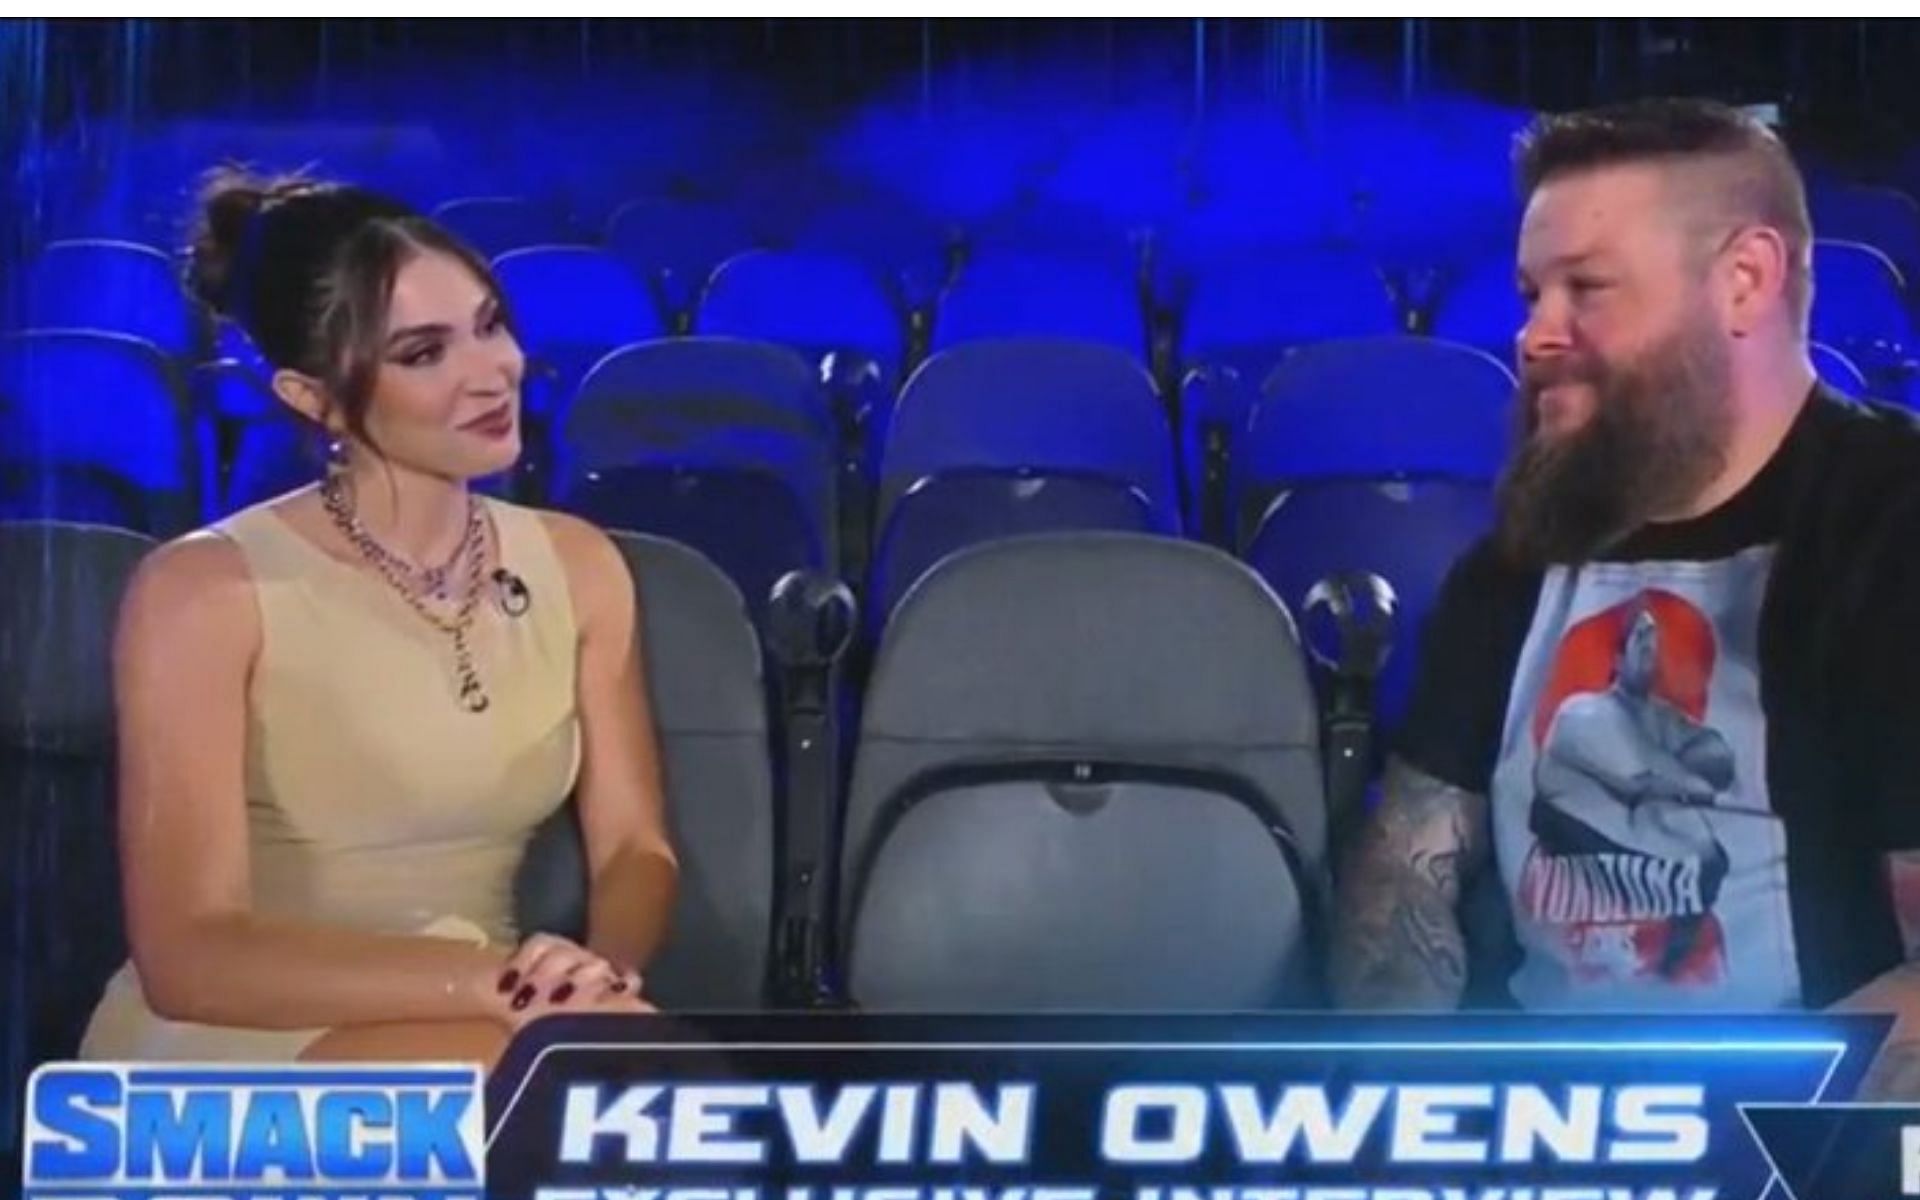 Cathy Kelley interviewed the newest SmackDown roster